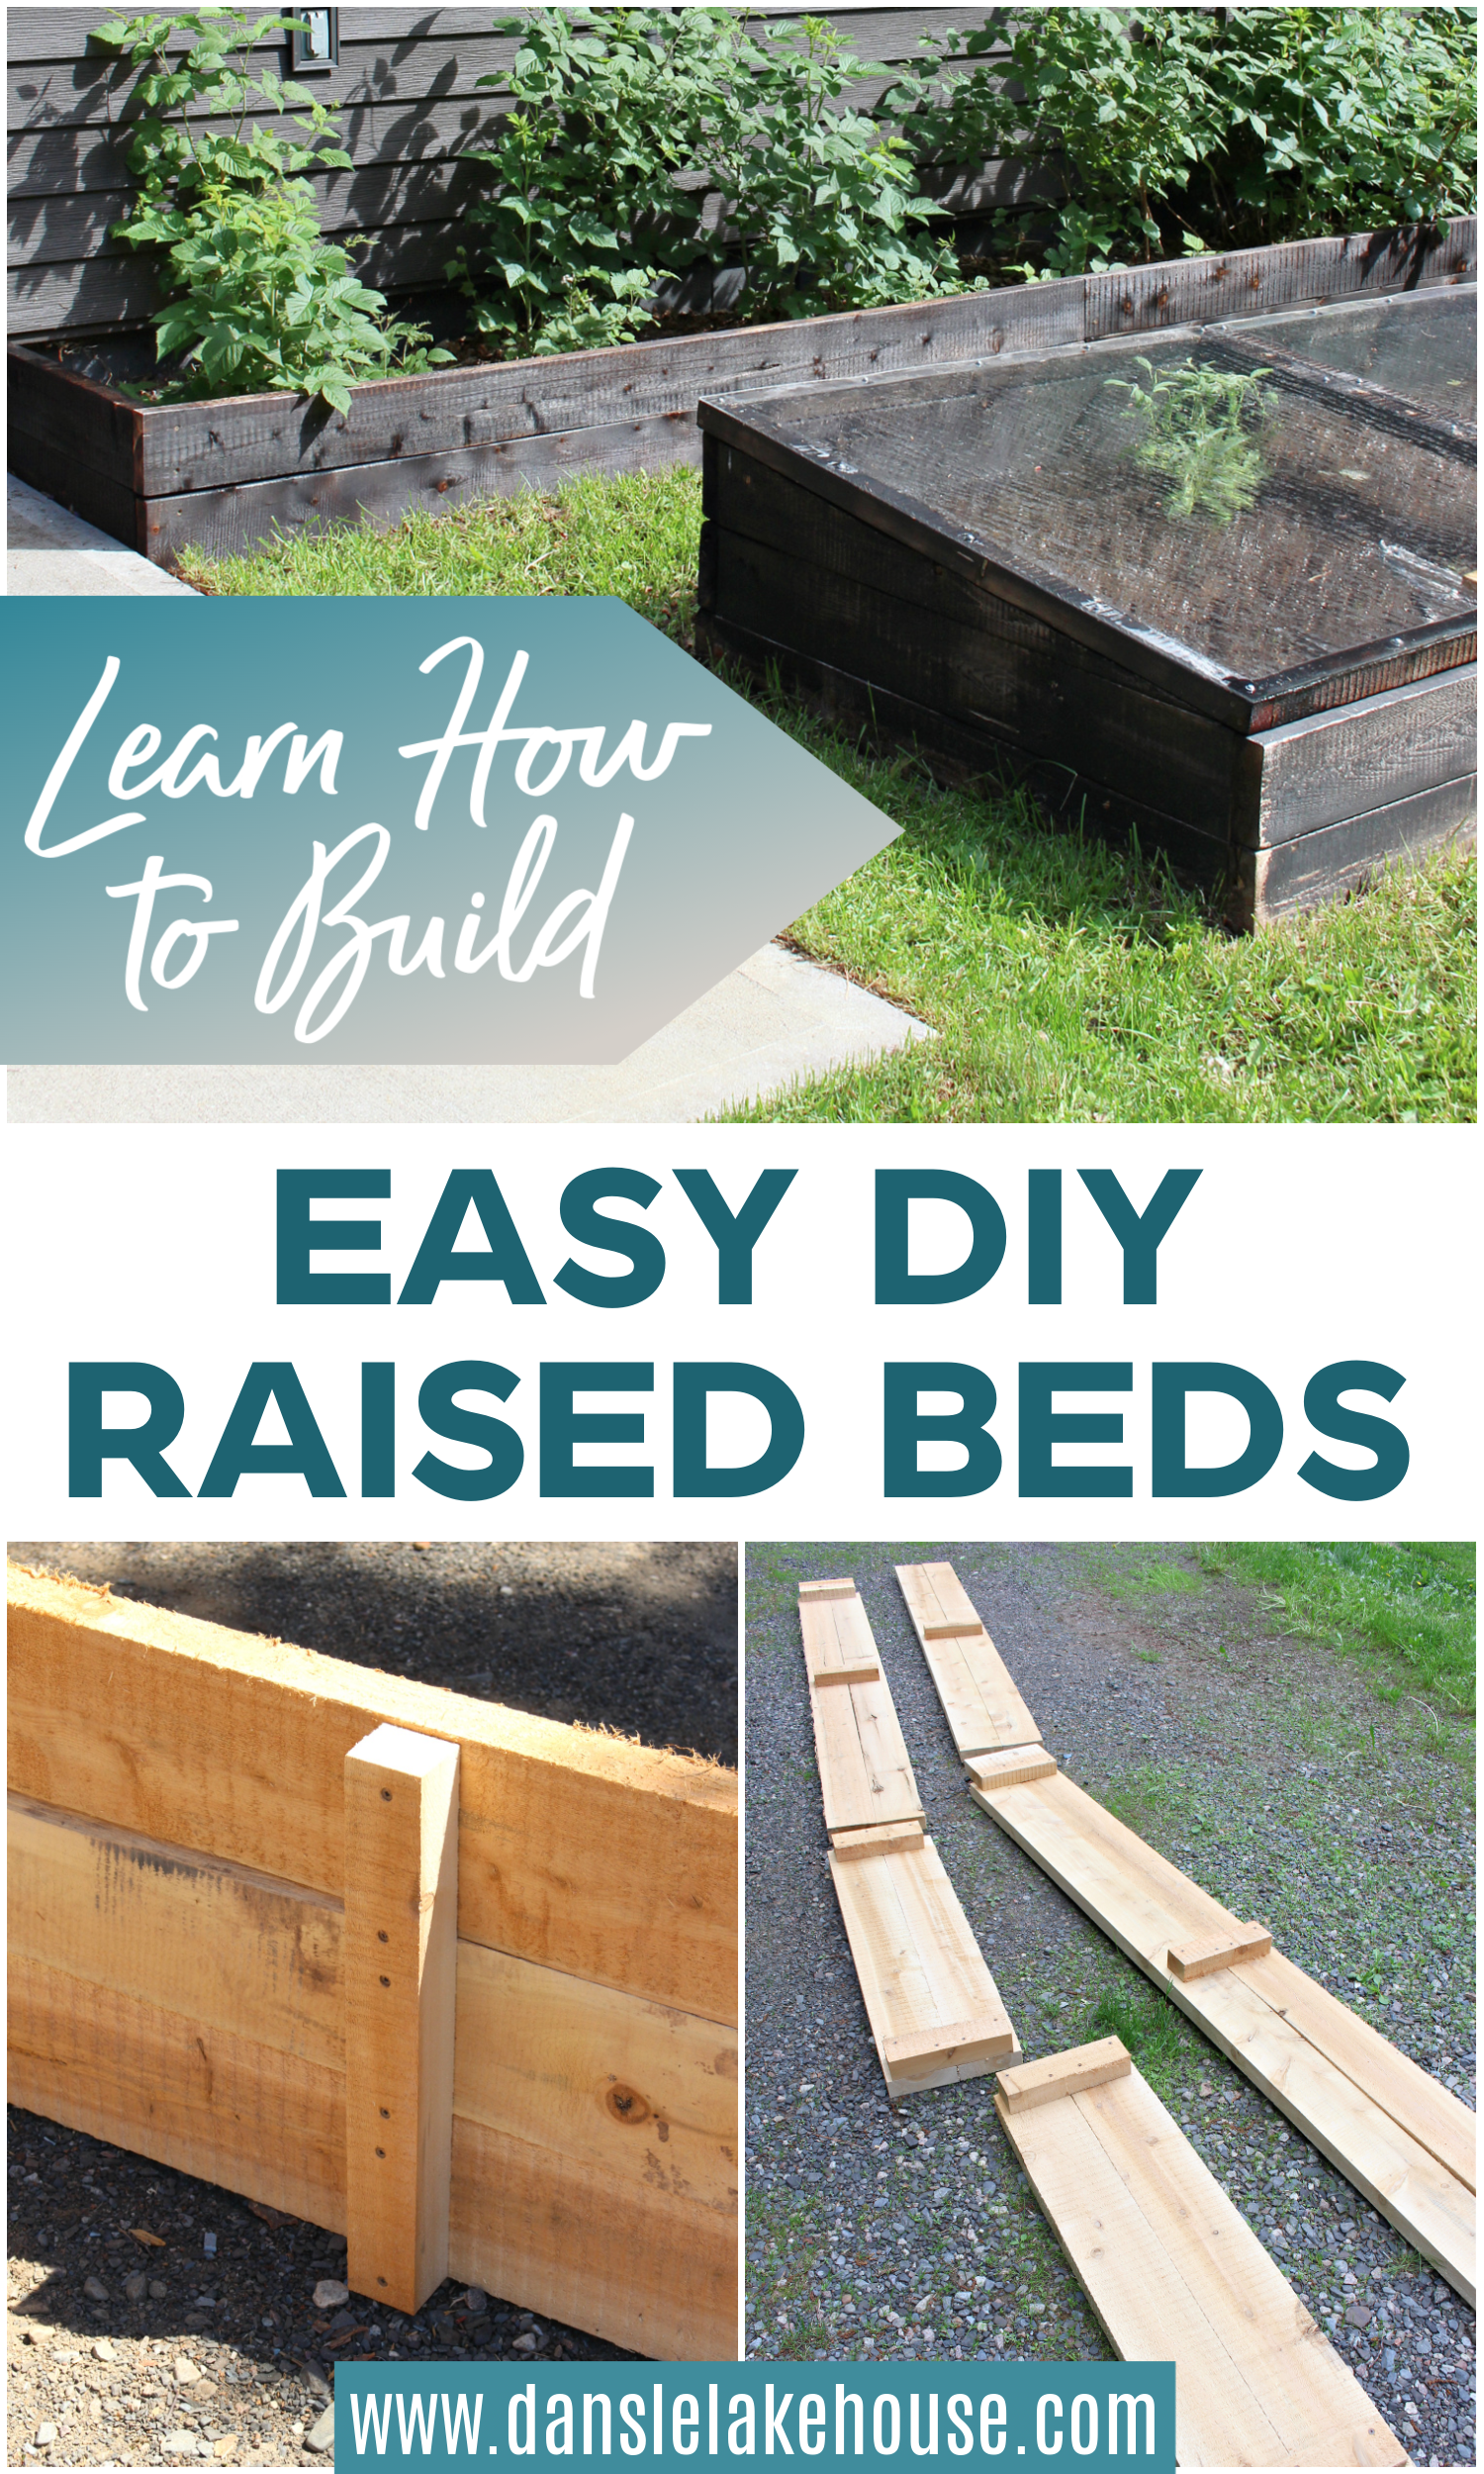 How to Build a Simple Raised Garden Bed